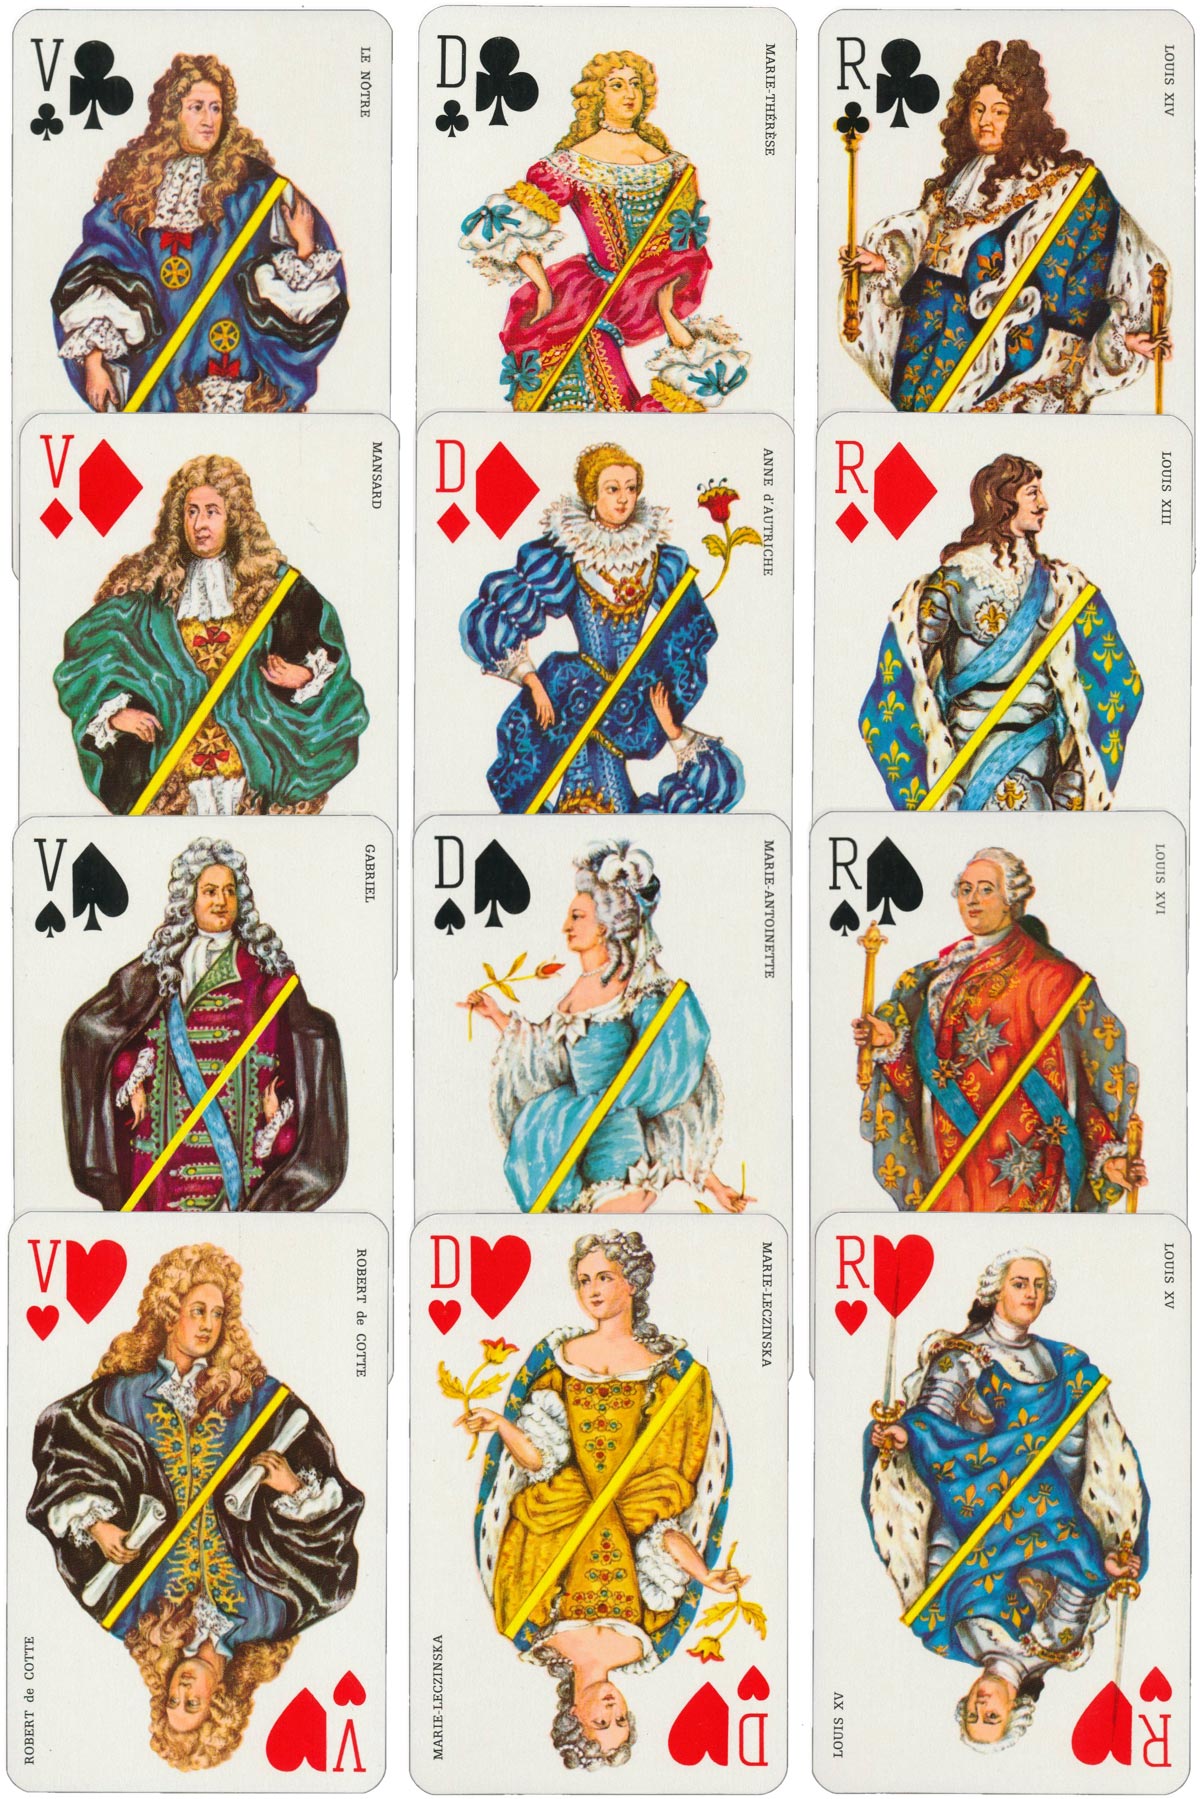 Versailles Playing Cards created by Matéja and printed by B. P. Grimaud, c.1970